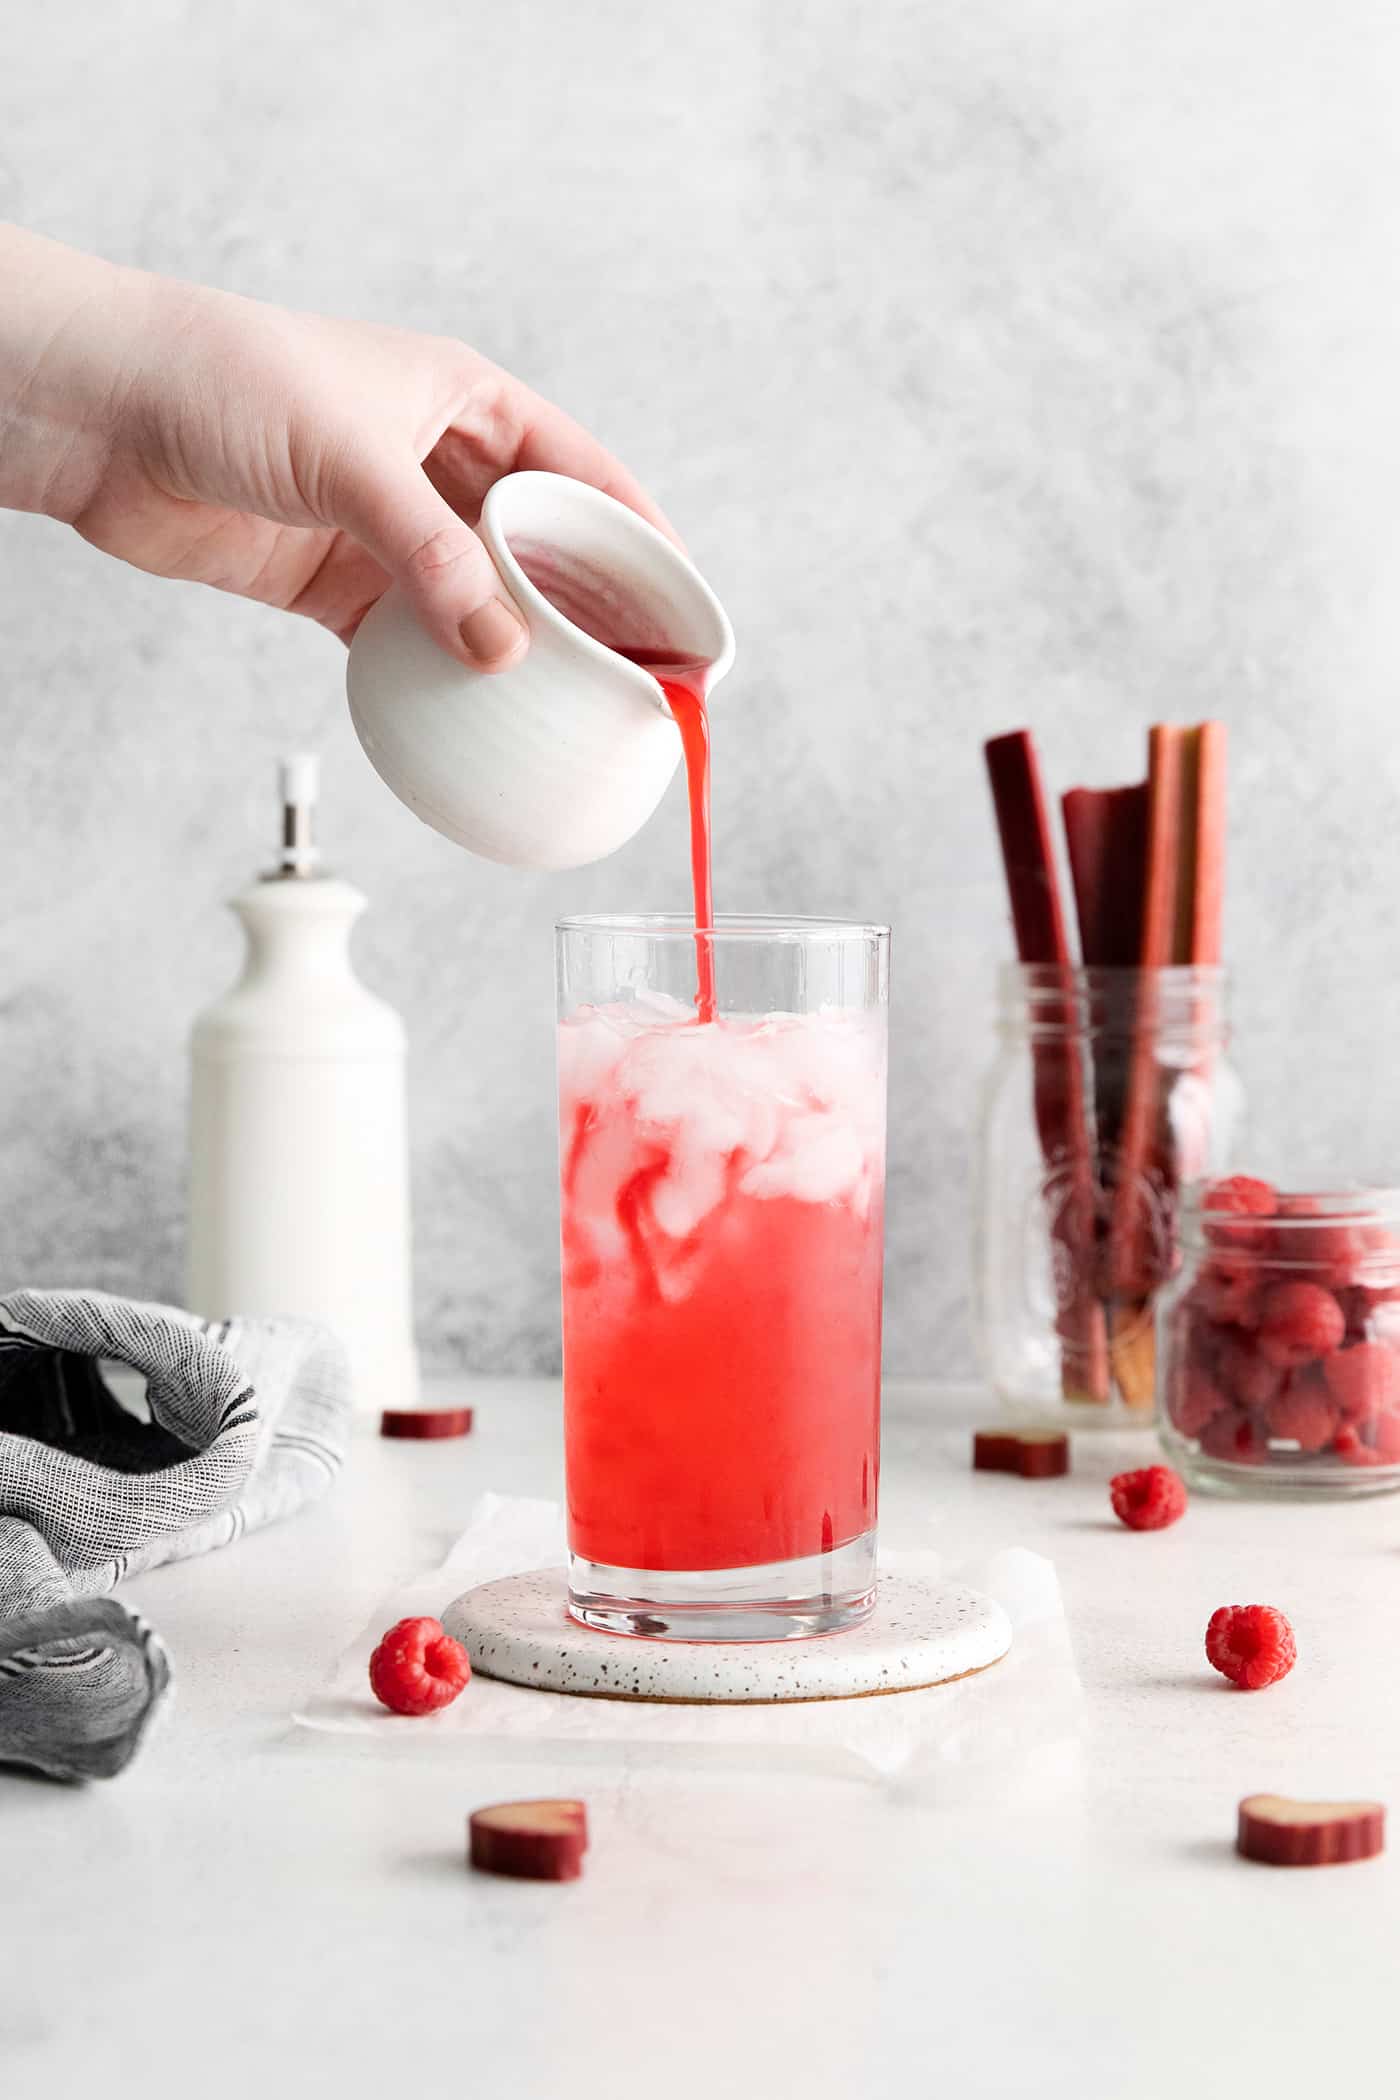 Raspberry syrup being poured into a glass with club soda